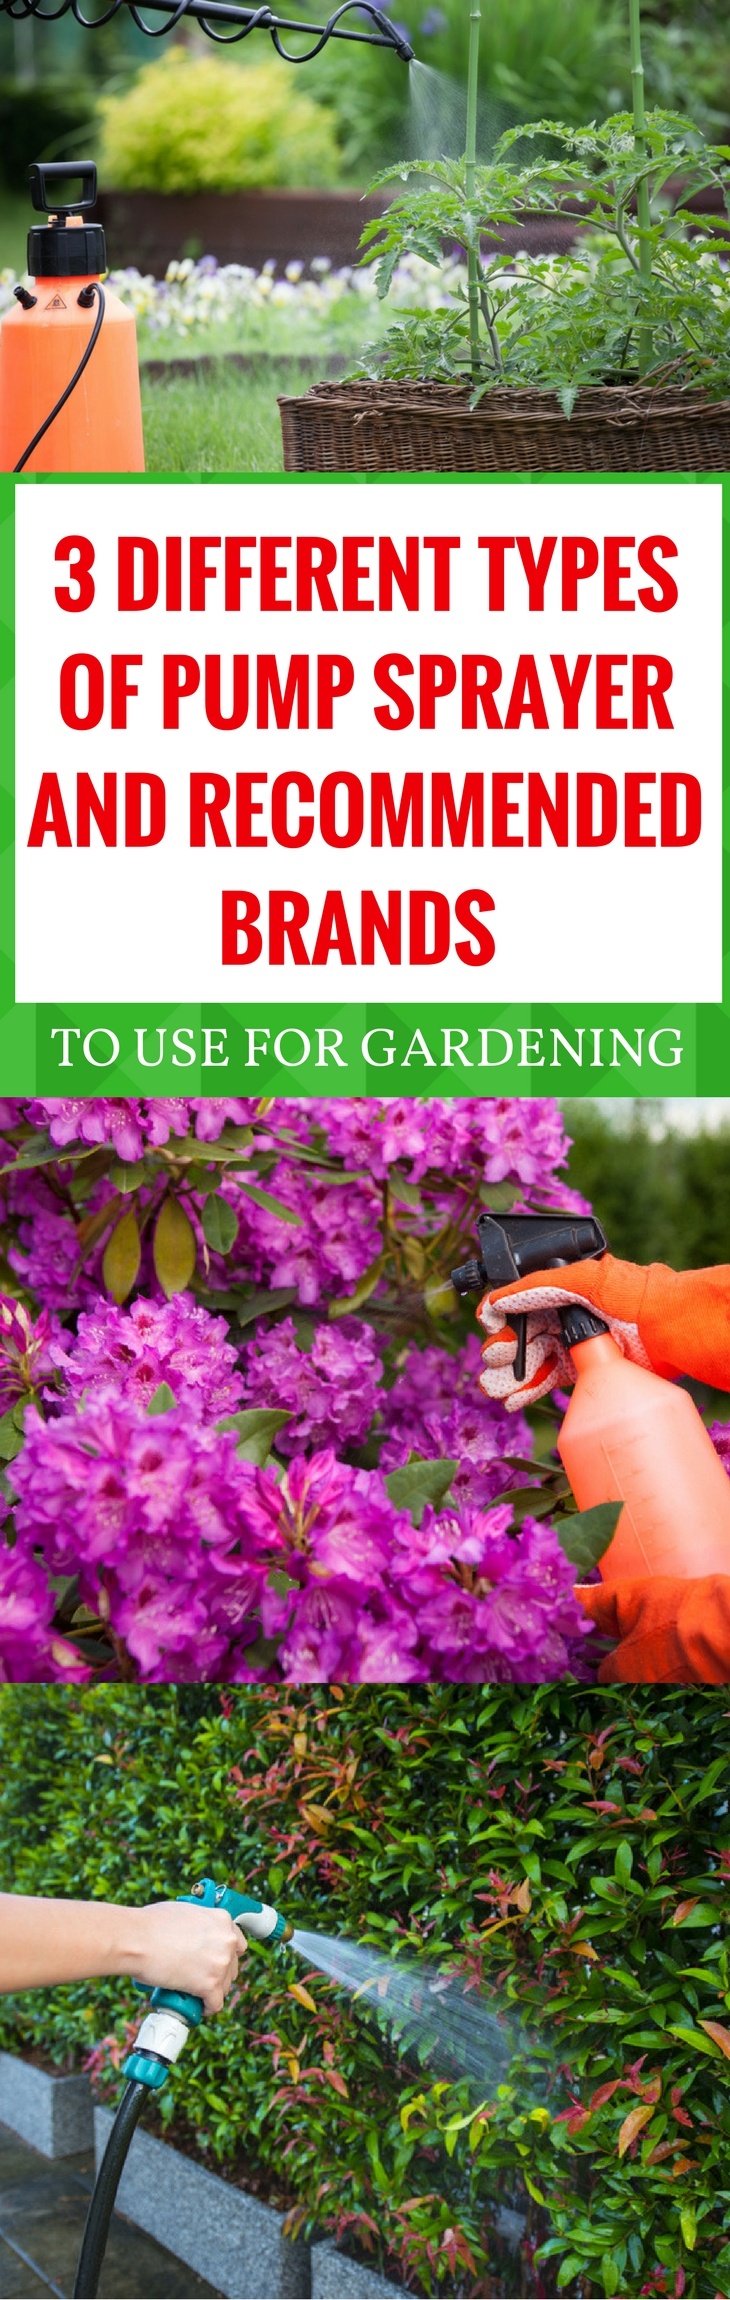 3 DIFFERENT TYPES OF PUMP SPRAYER AND RECOMMENDED BRANDS TO USE FOR GARDENING pin it